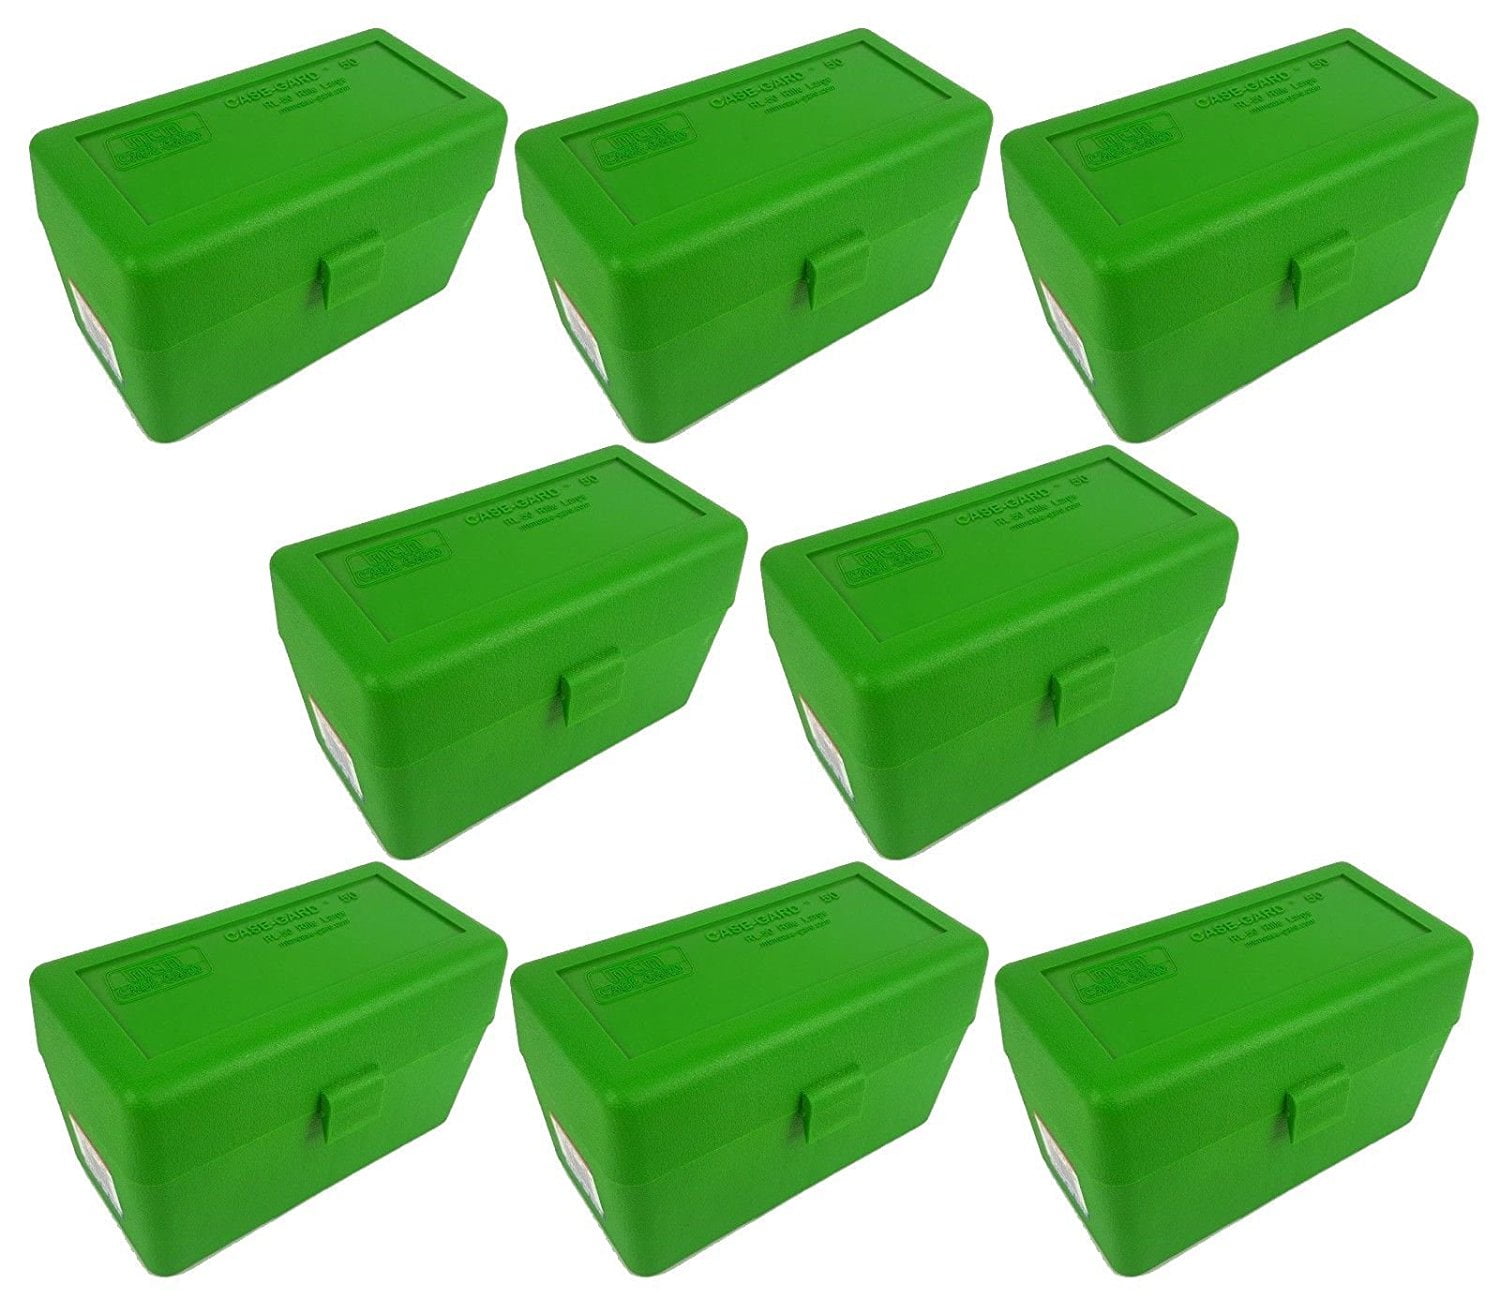 50 Round Storage Boxes For .25-06 Rifle FREE SHIPPING 1 BERRY'S PLASTIC AMMO 